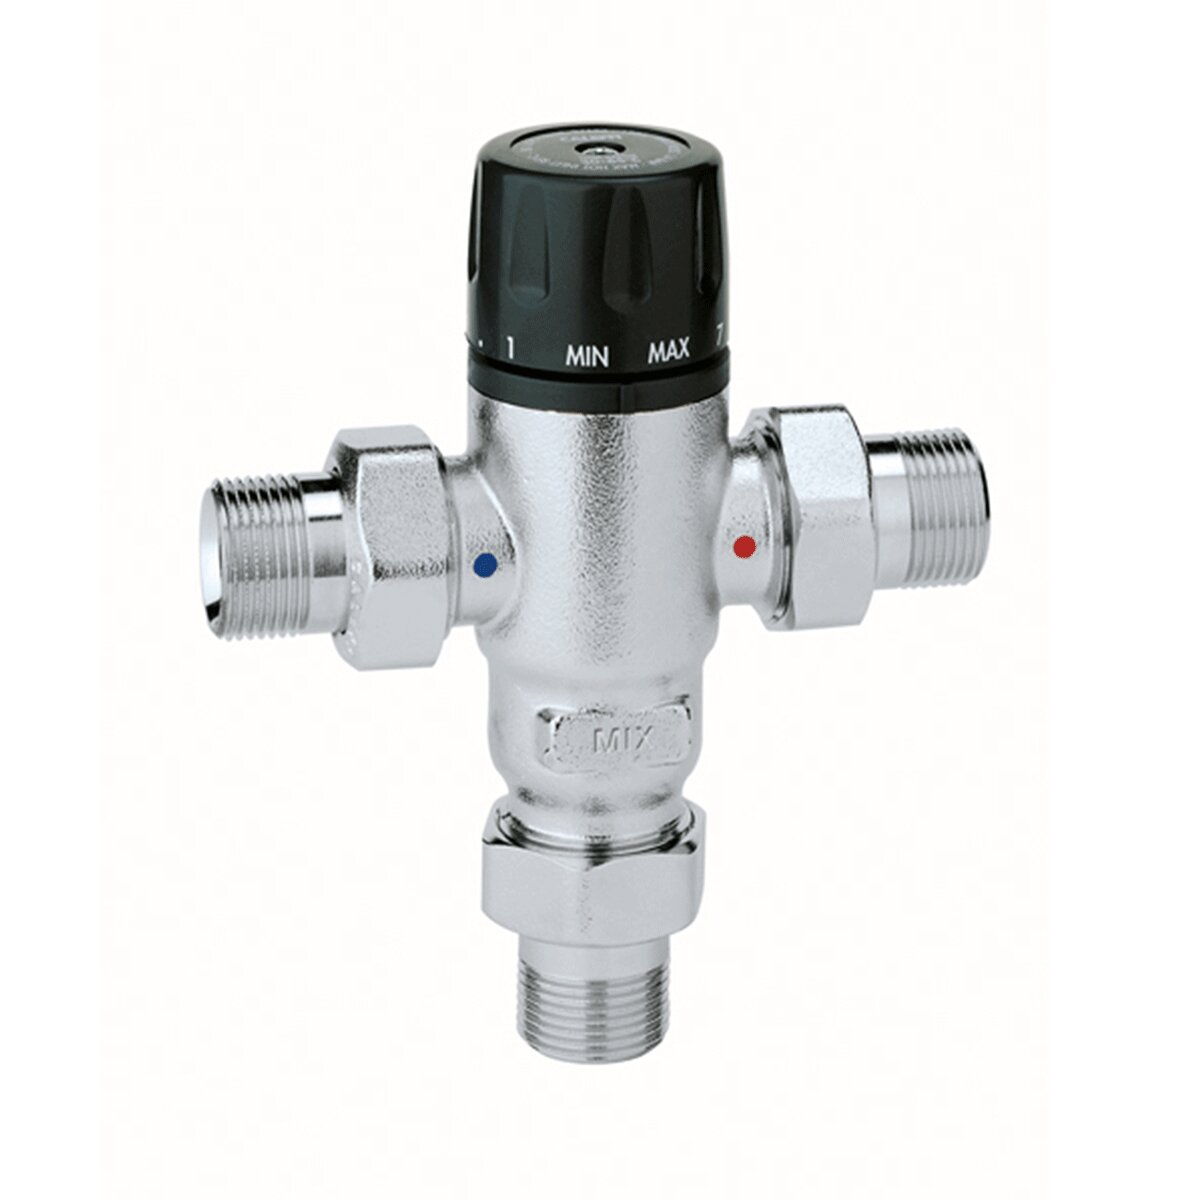 Caleffi 521 series thermostatic mixer with 3/4" knob